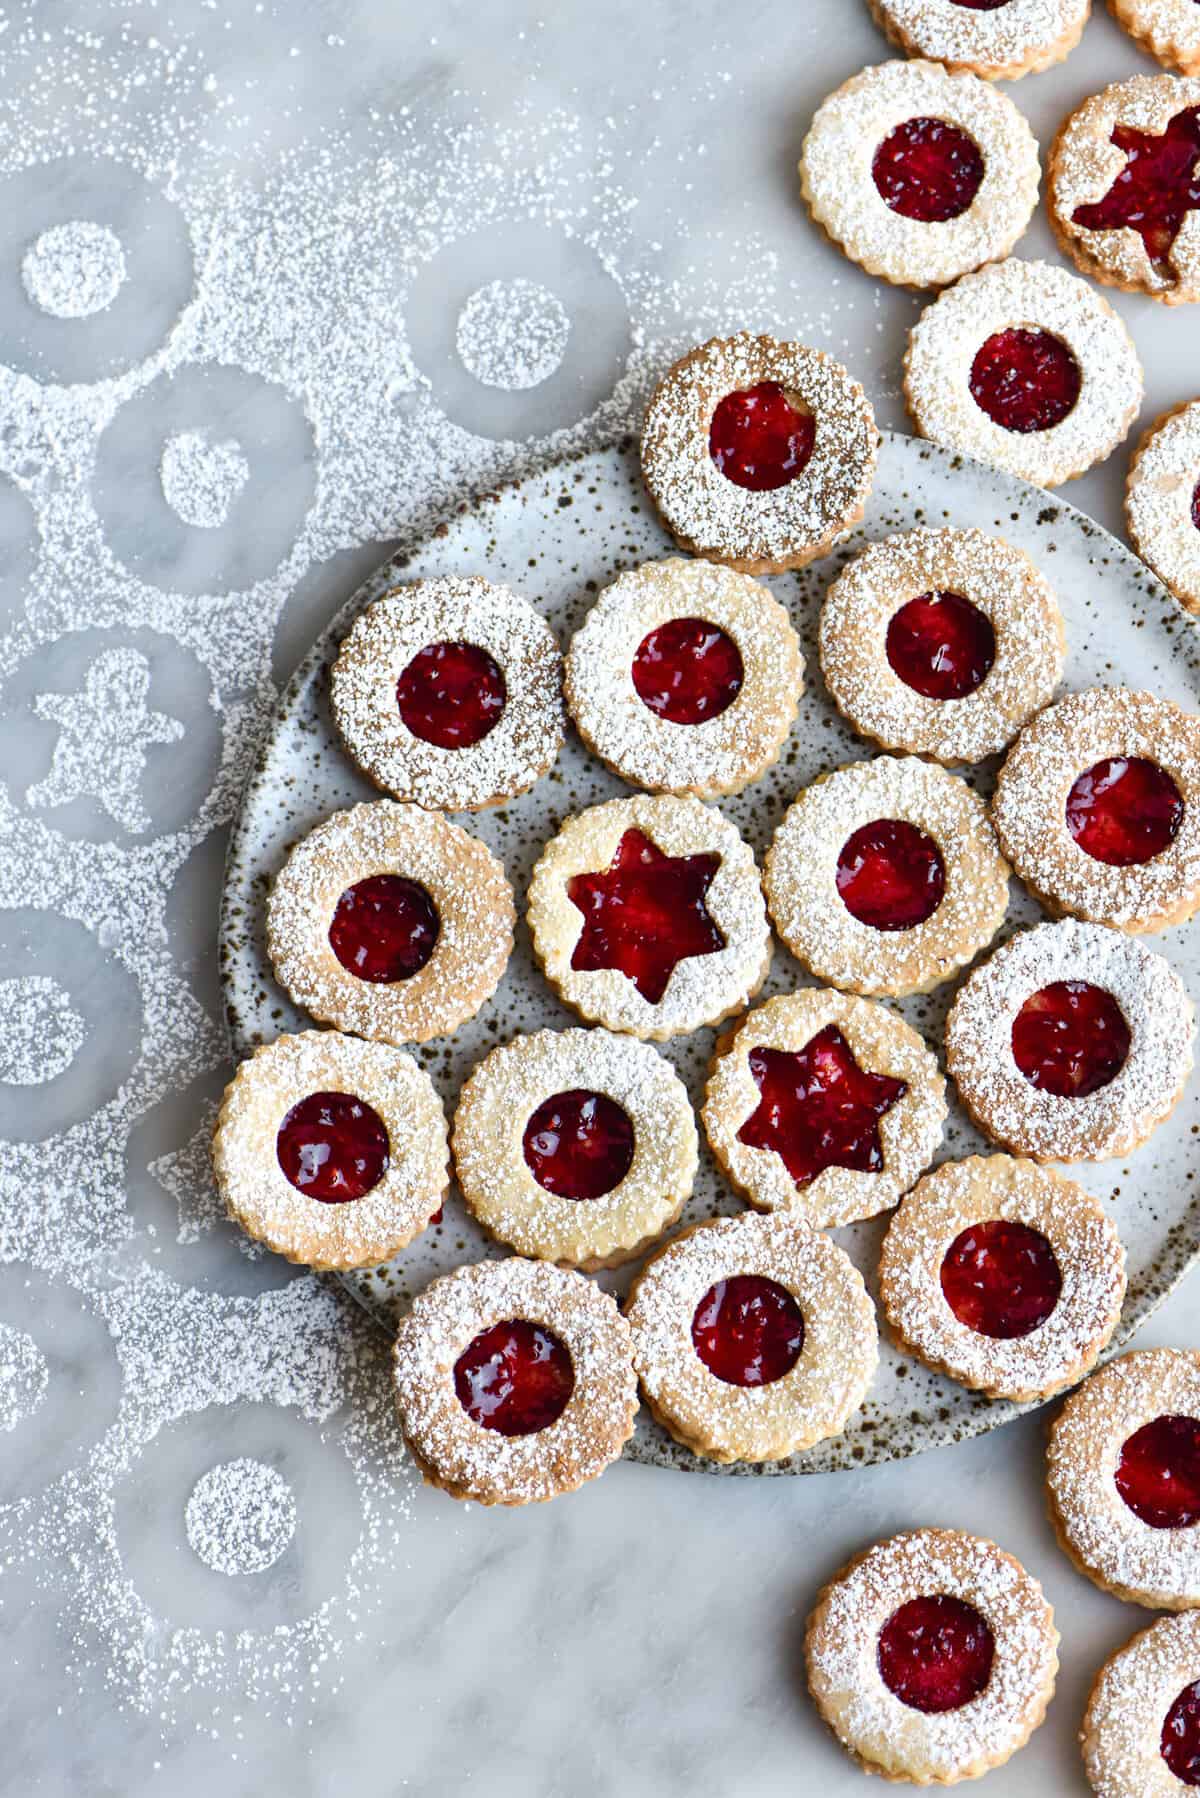 Gluten free linzer cookies with raspberry jam, sprinkled with icing sugar and set against an icing sugar sprinkled white marble backdrop